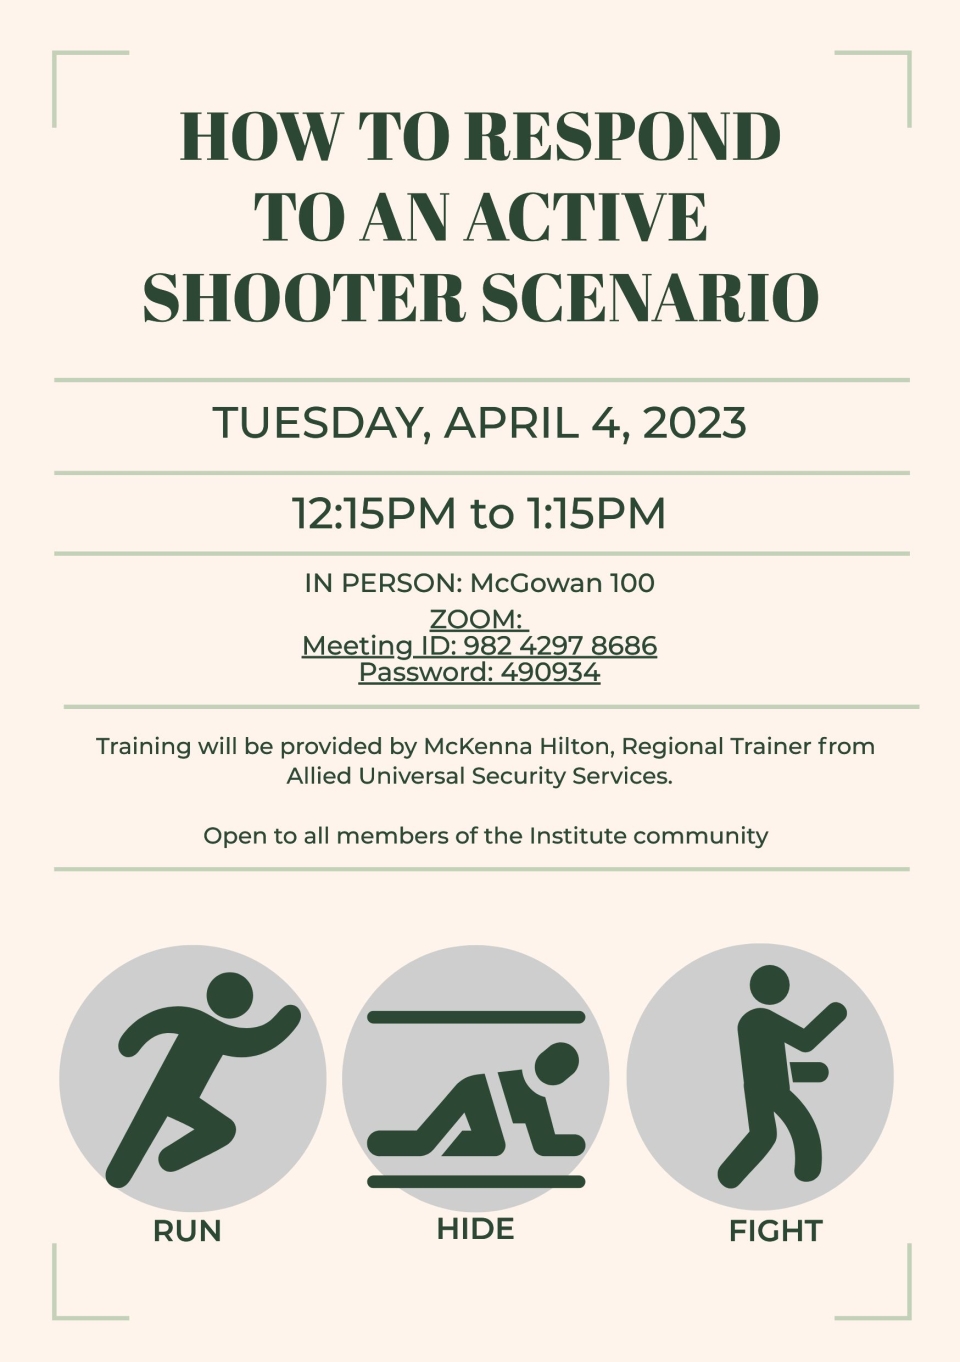 Poster about info session on how to respond to an active shooter scenario.